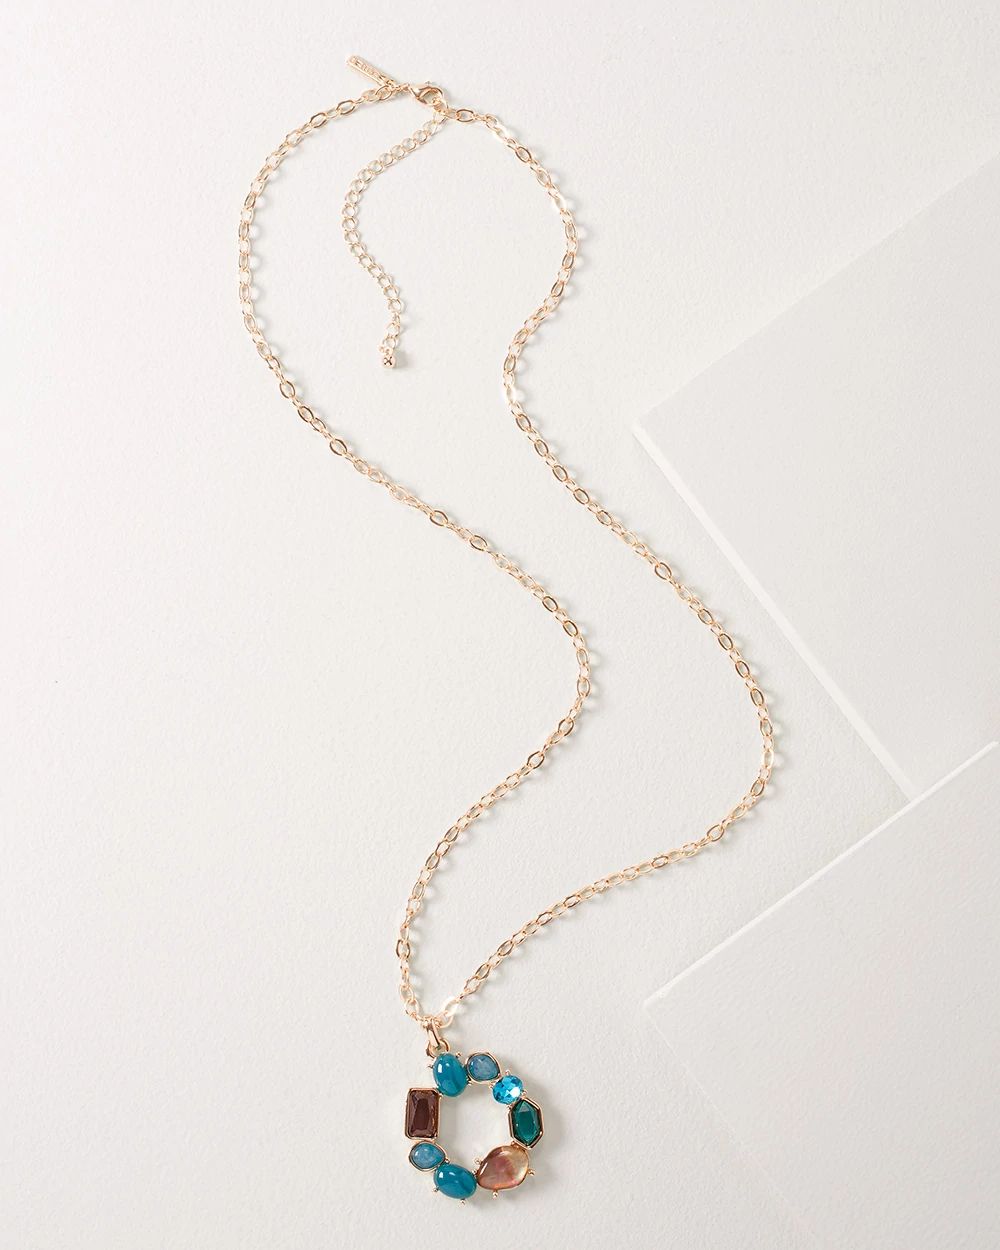 Goldtone Ocean Mix Stone Pendant Necklace click to view larger image.